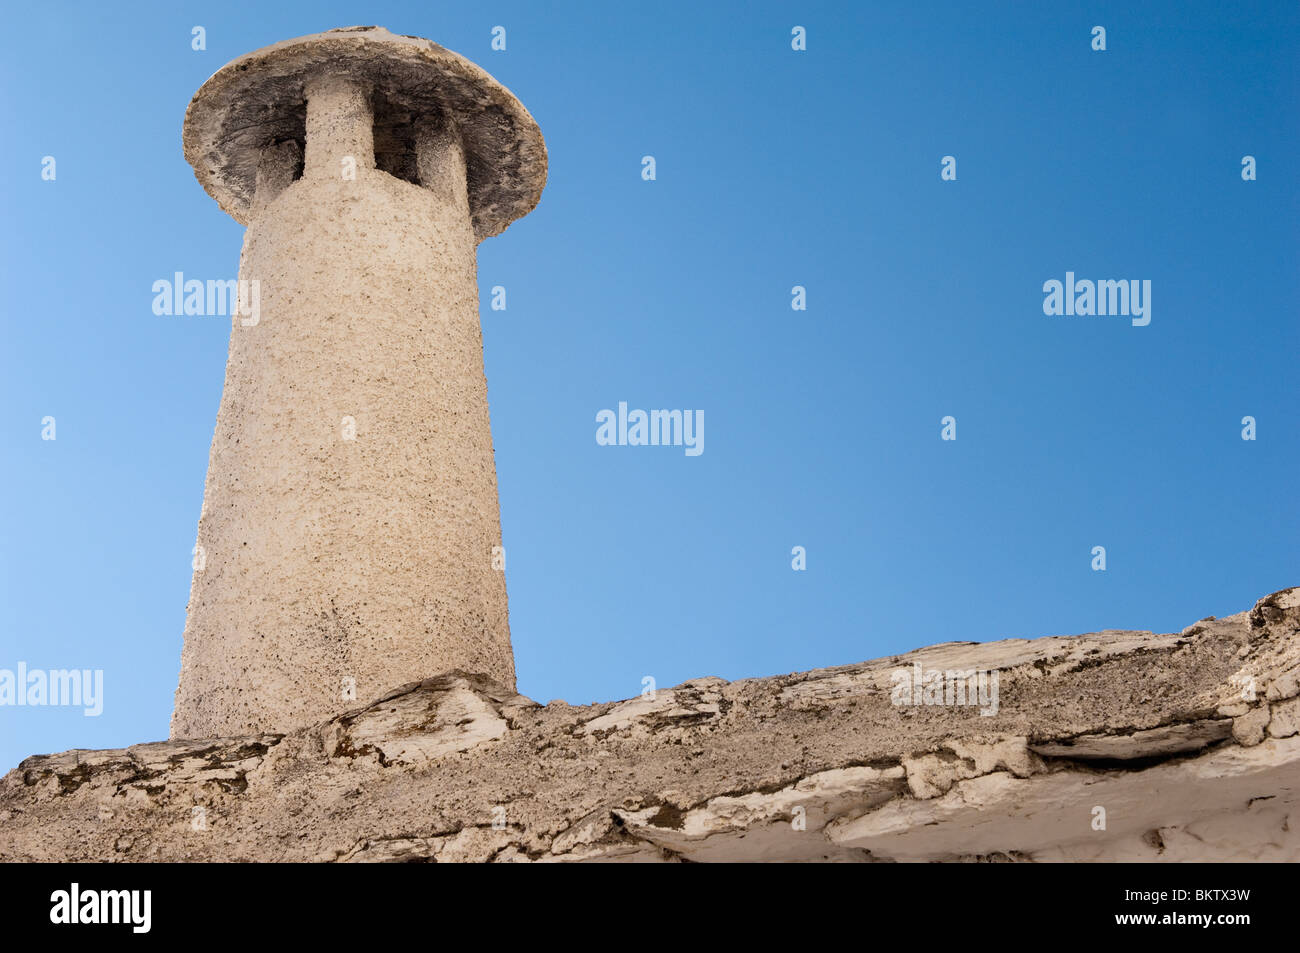 An typical chimney of an Andalucian village house Stock Photo